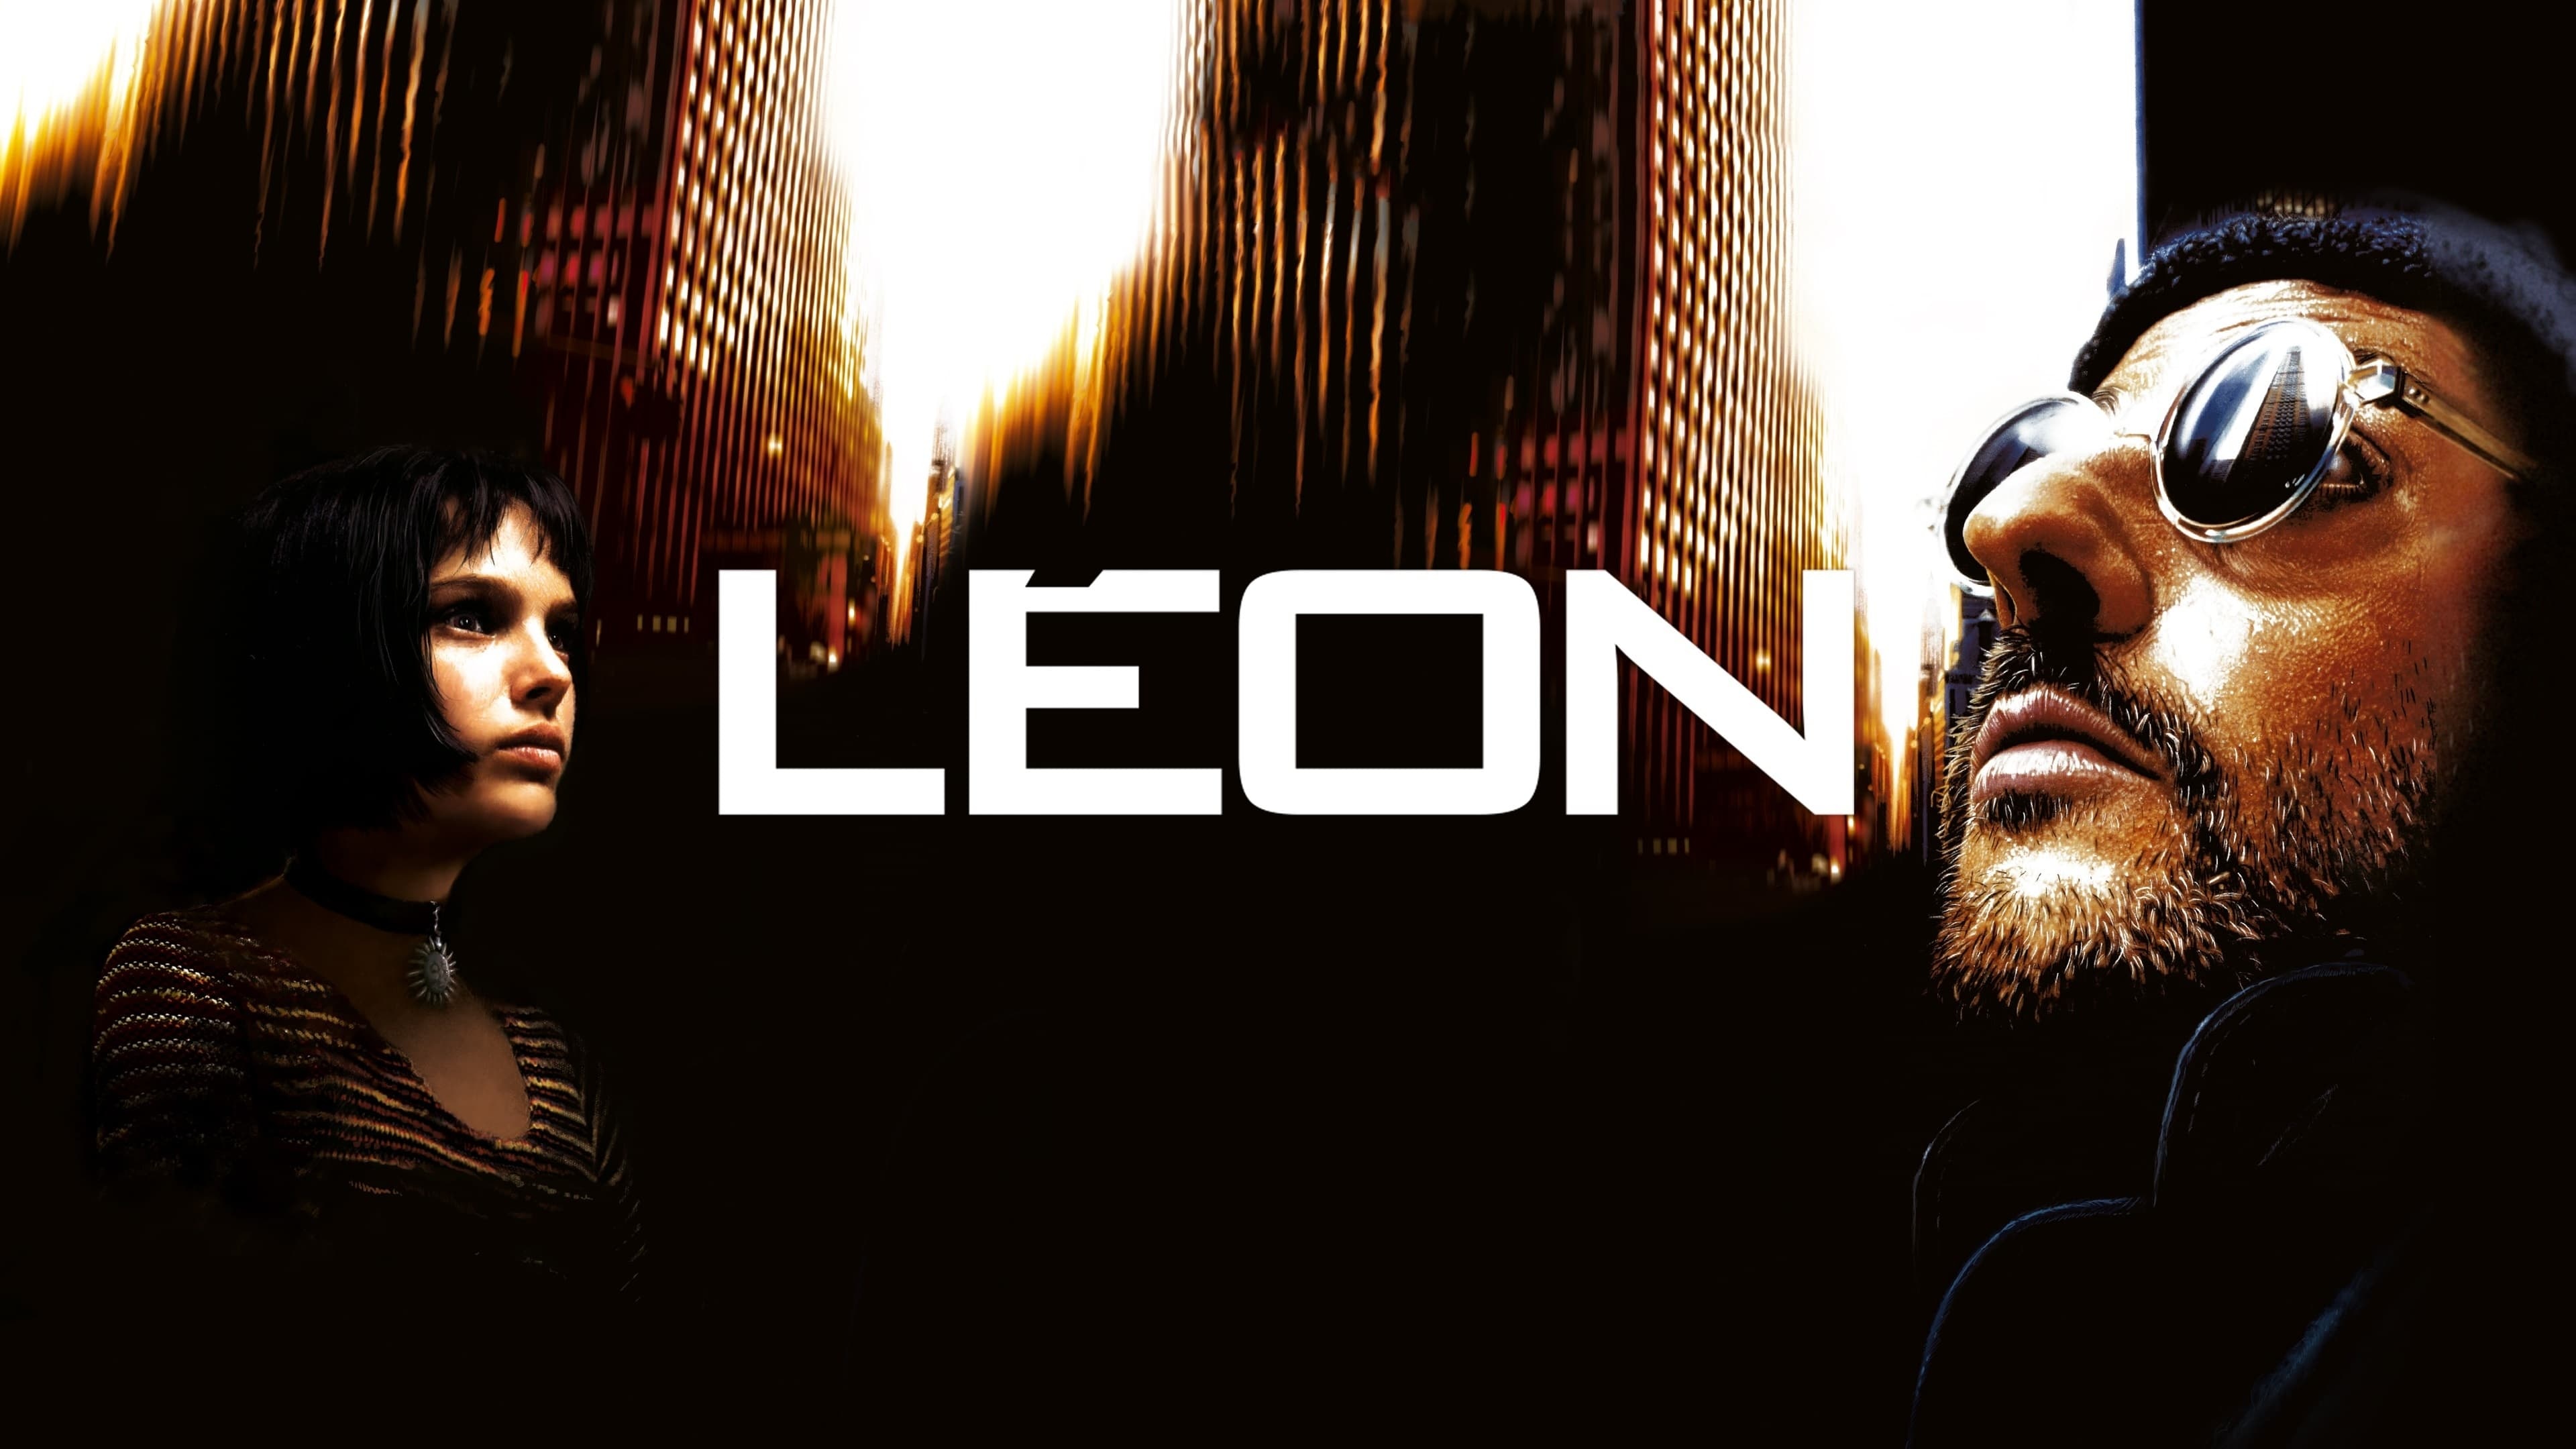 Leon: Originally titled The Professional in the United States. 3840x2160 4K Wallpaper.